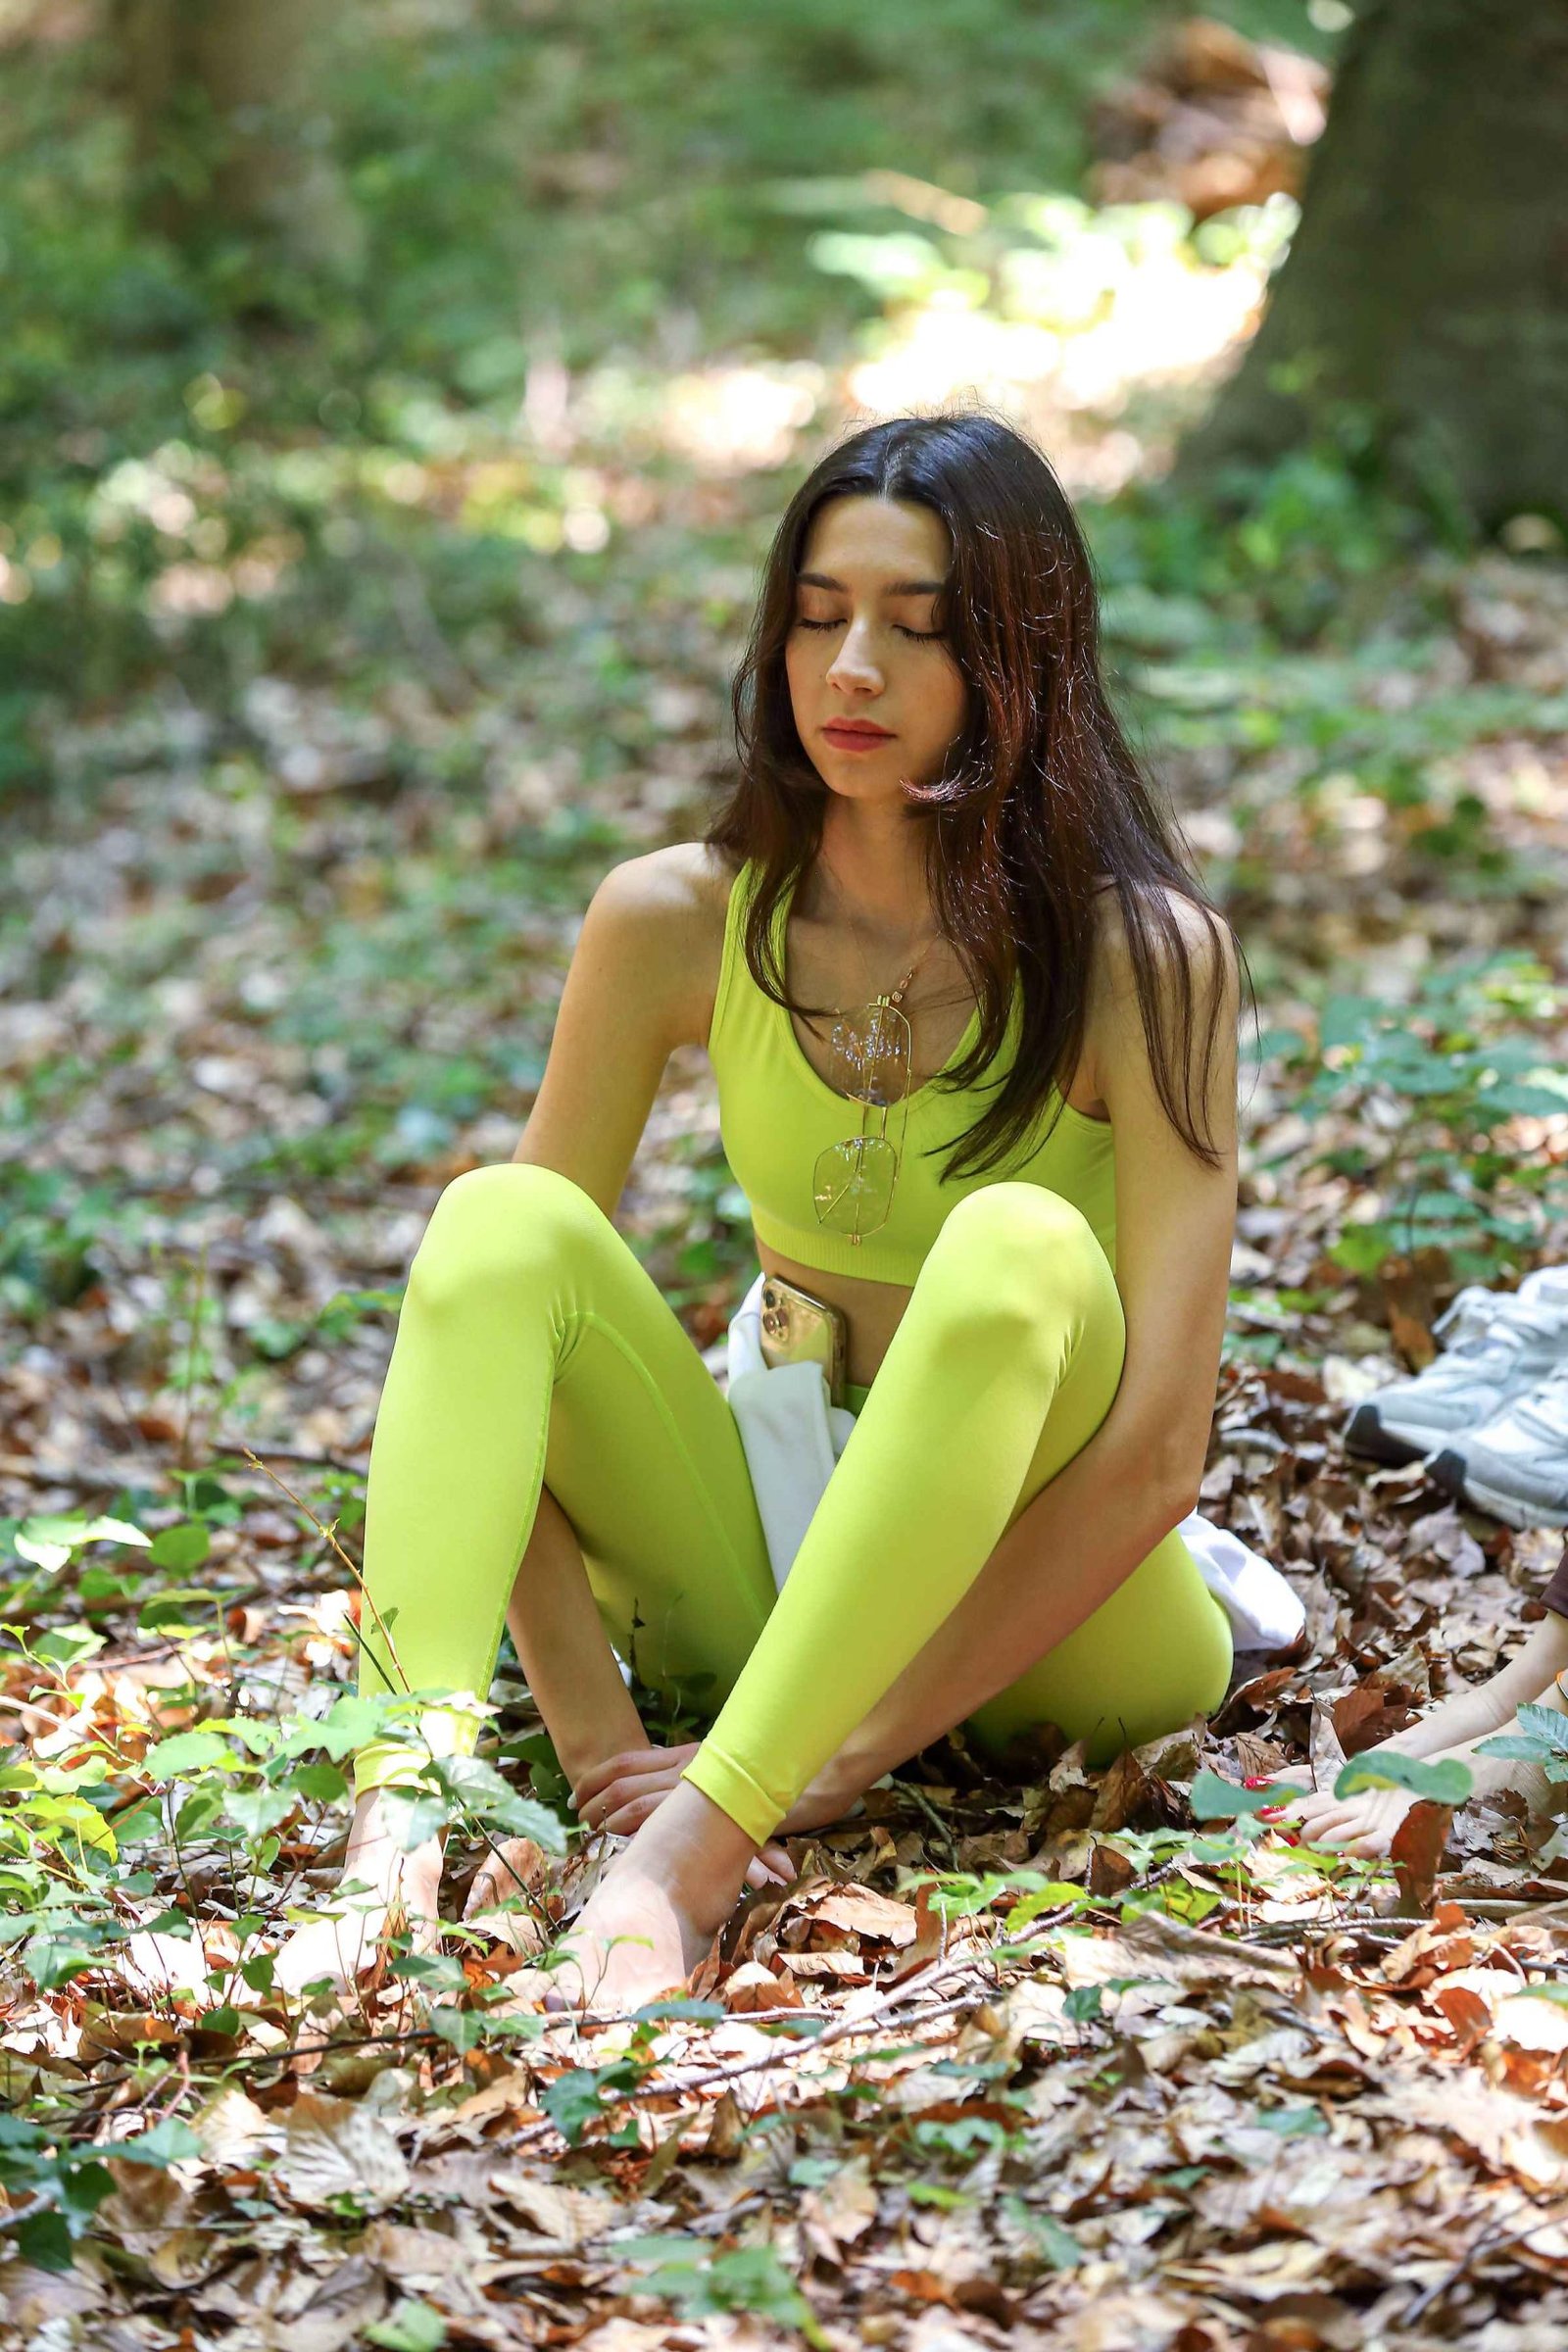 Ayşe Tolga Forest Therapy Seamlesstance Nature Experience (22)